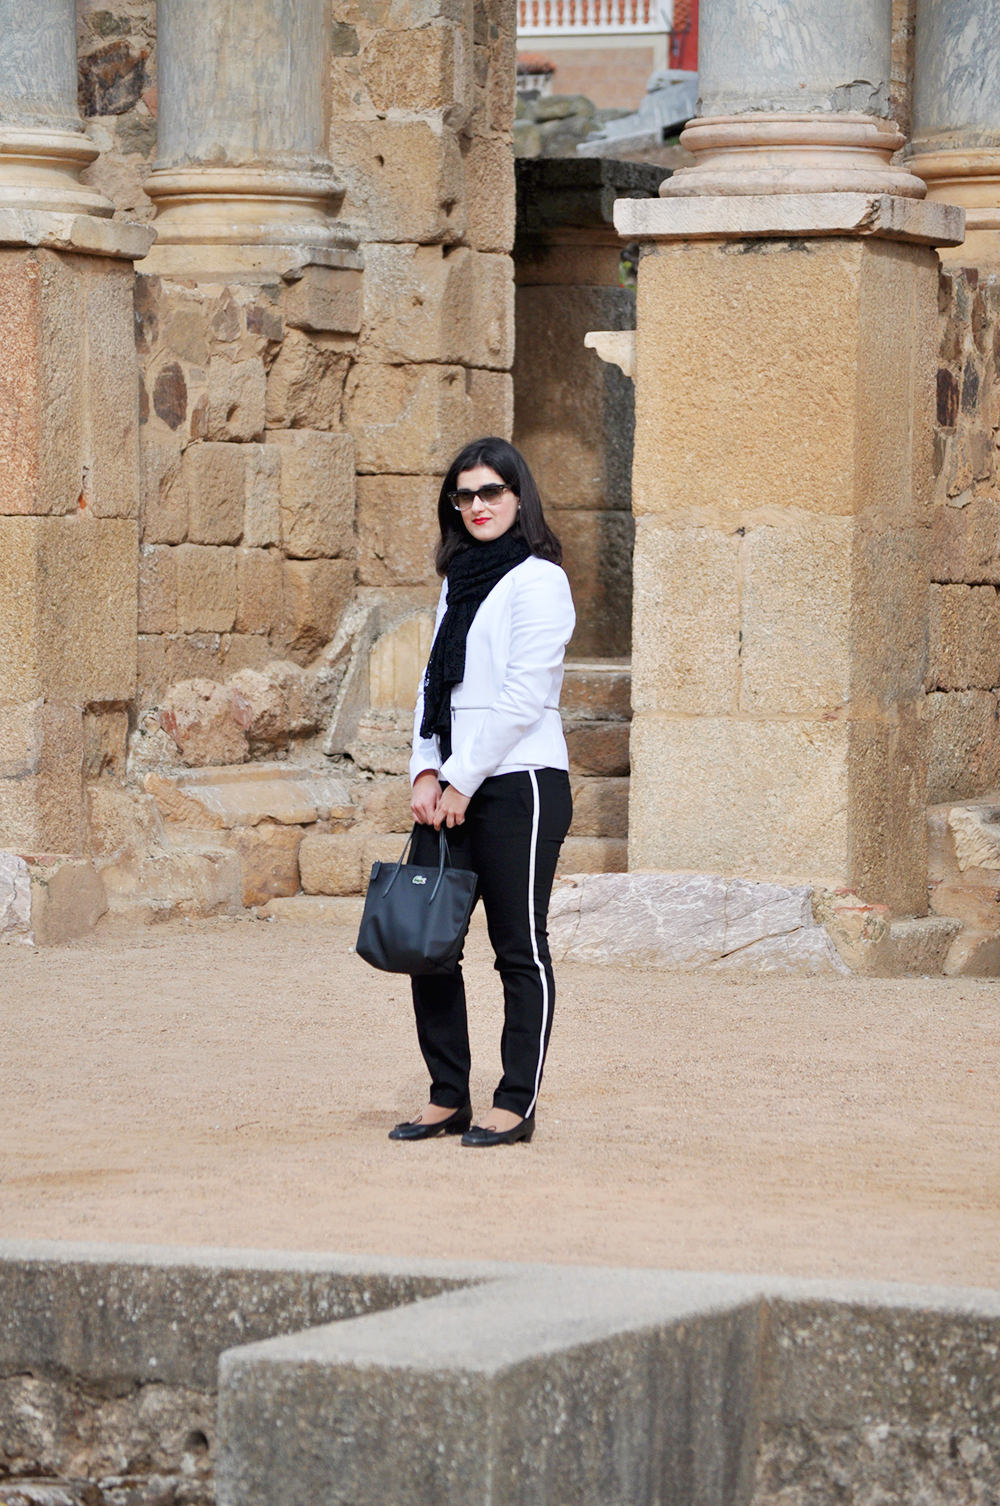 something fashion valencia blogger fblogger spain, teatro merida ancient, outfit, white carroll jacket tailored, comfortable style traveling extremadura trip, ancient architecture roman culture, lacoste mini bag zara scarf